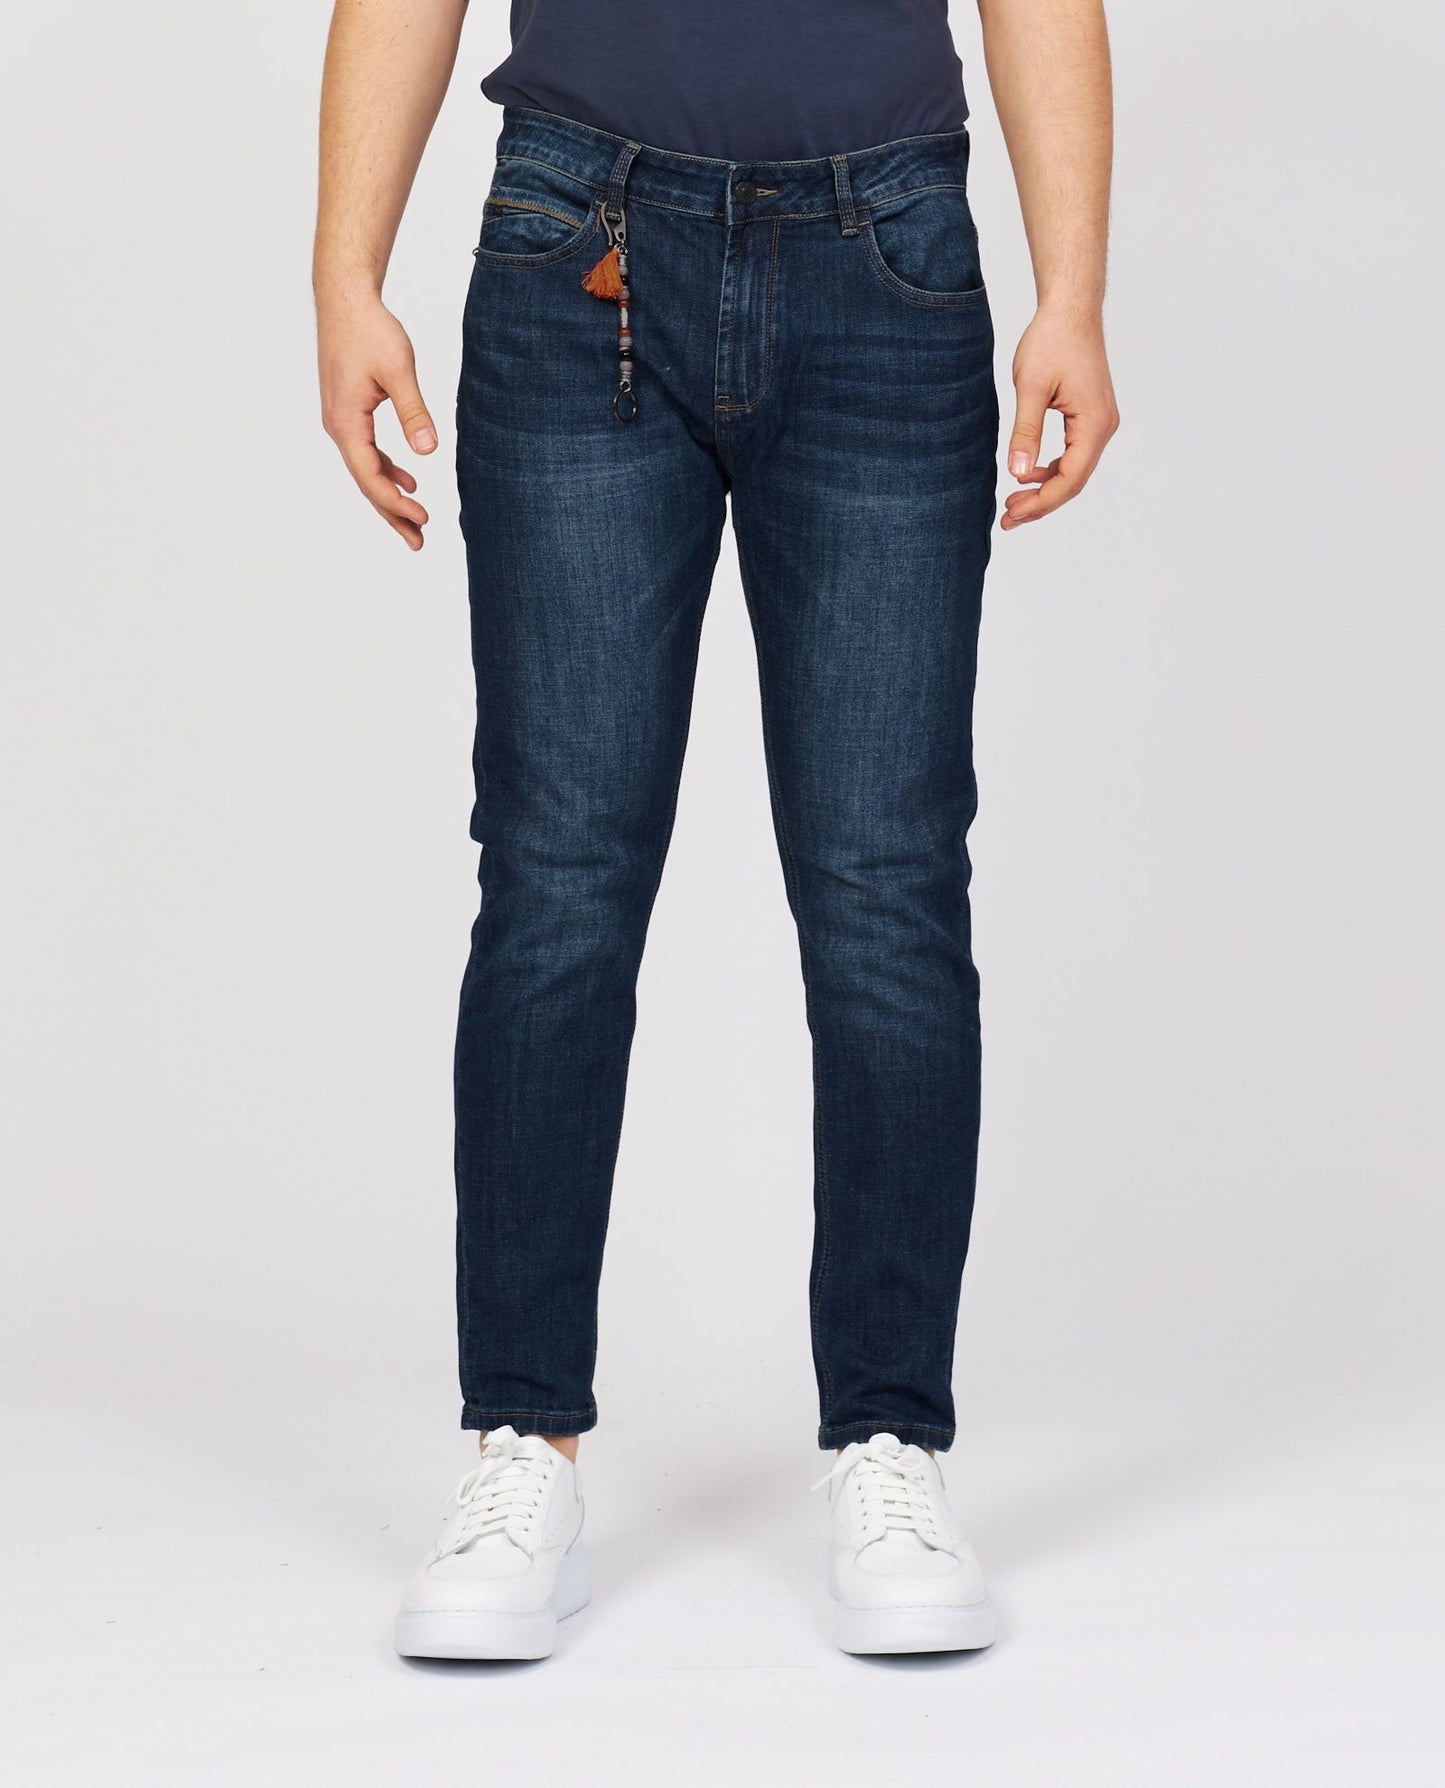 Yes Zee Chic Blue Five-Pocket Stretch Jeans